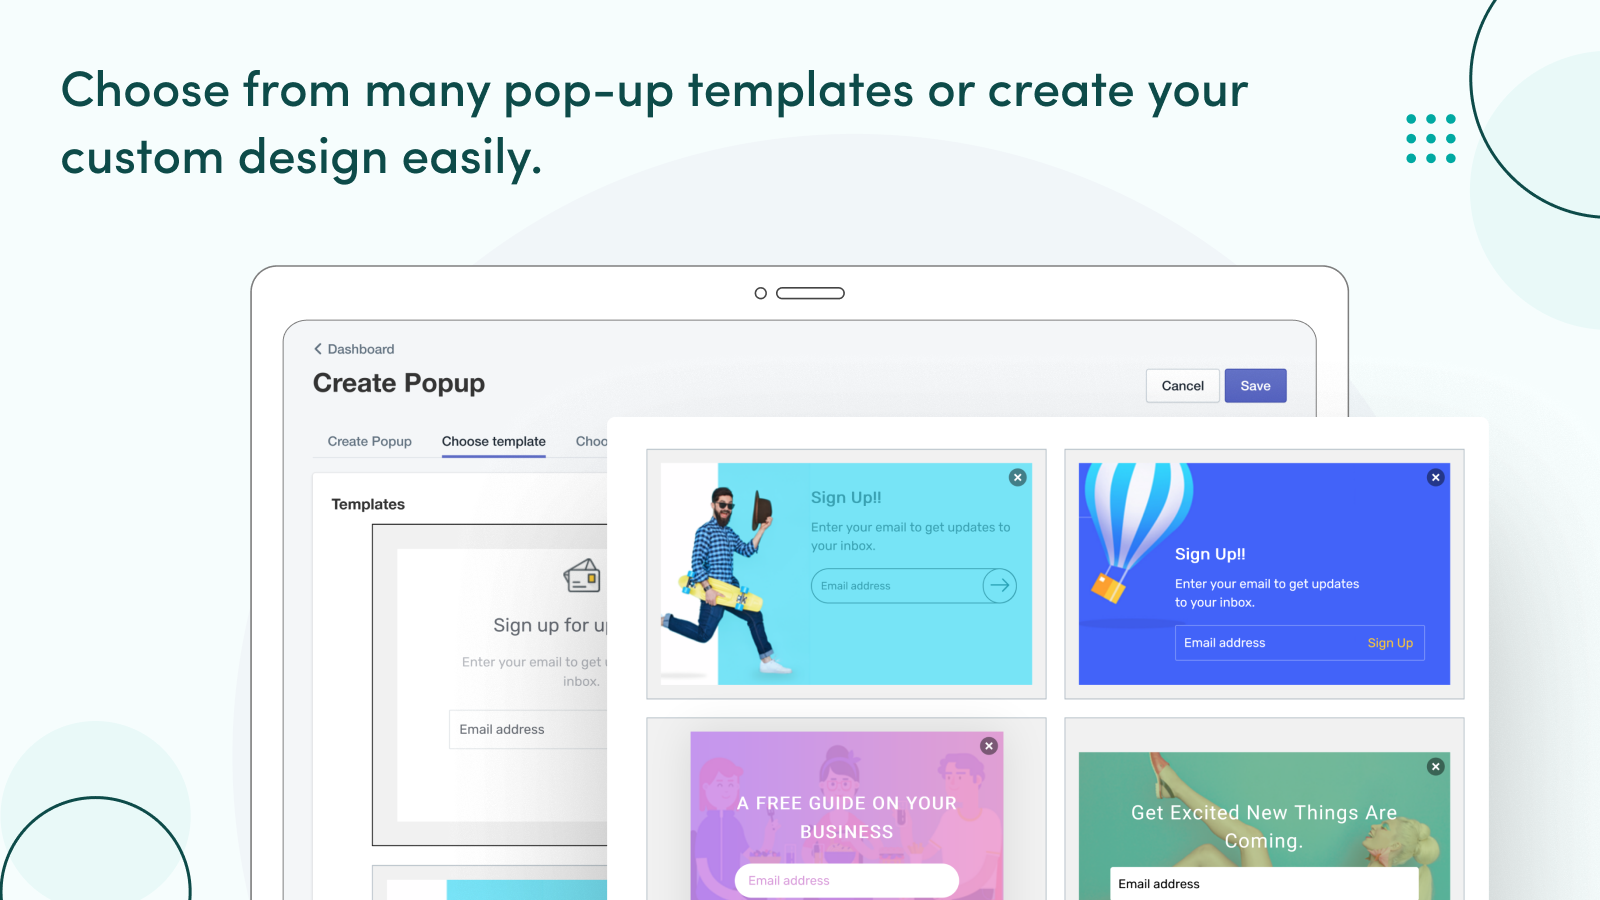 Choose from multiple popup templates, or customize your own.